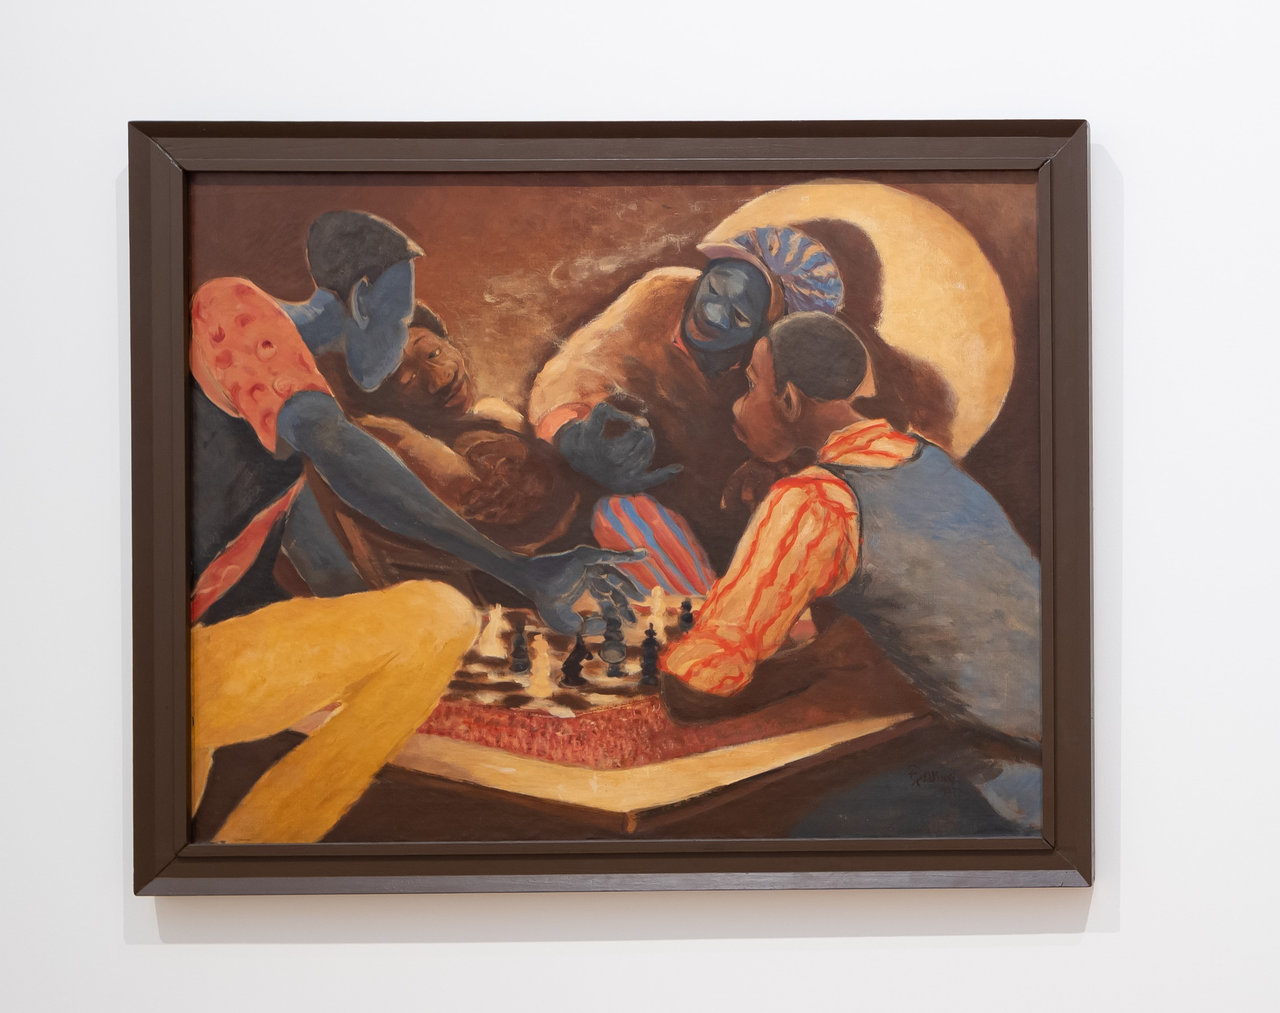 Quintus Jan Telting, 'The Chess player', 1973.  